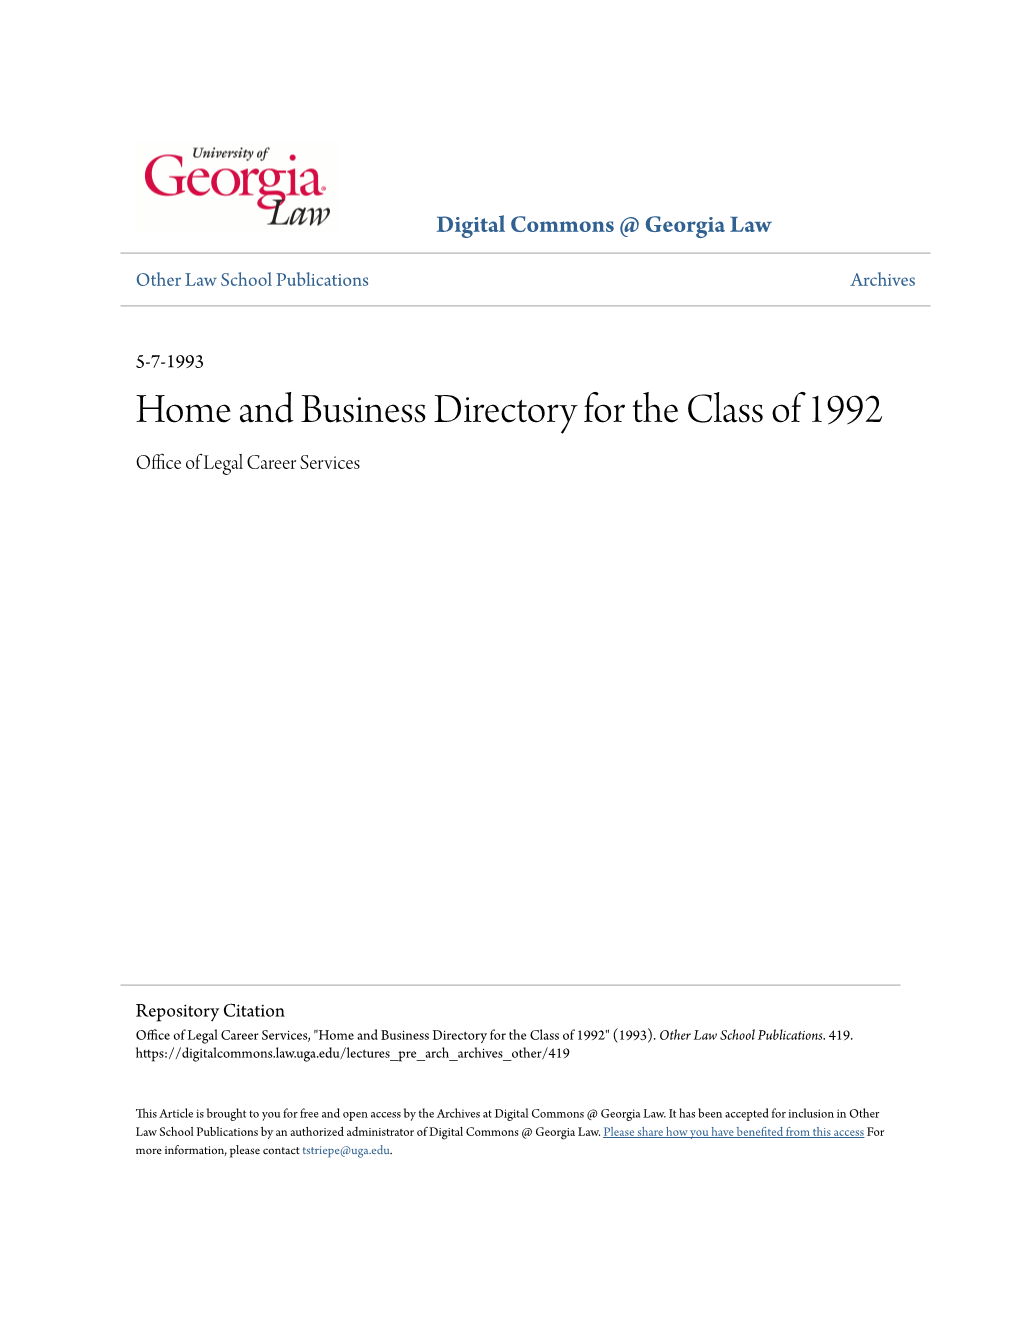 Home and Business Directory for the Class of 1992 Office of Legal Career Services